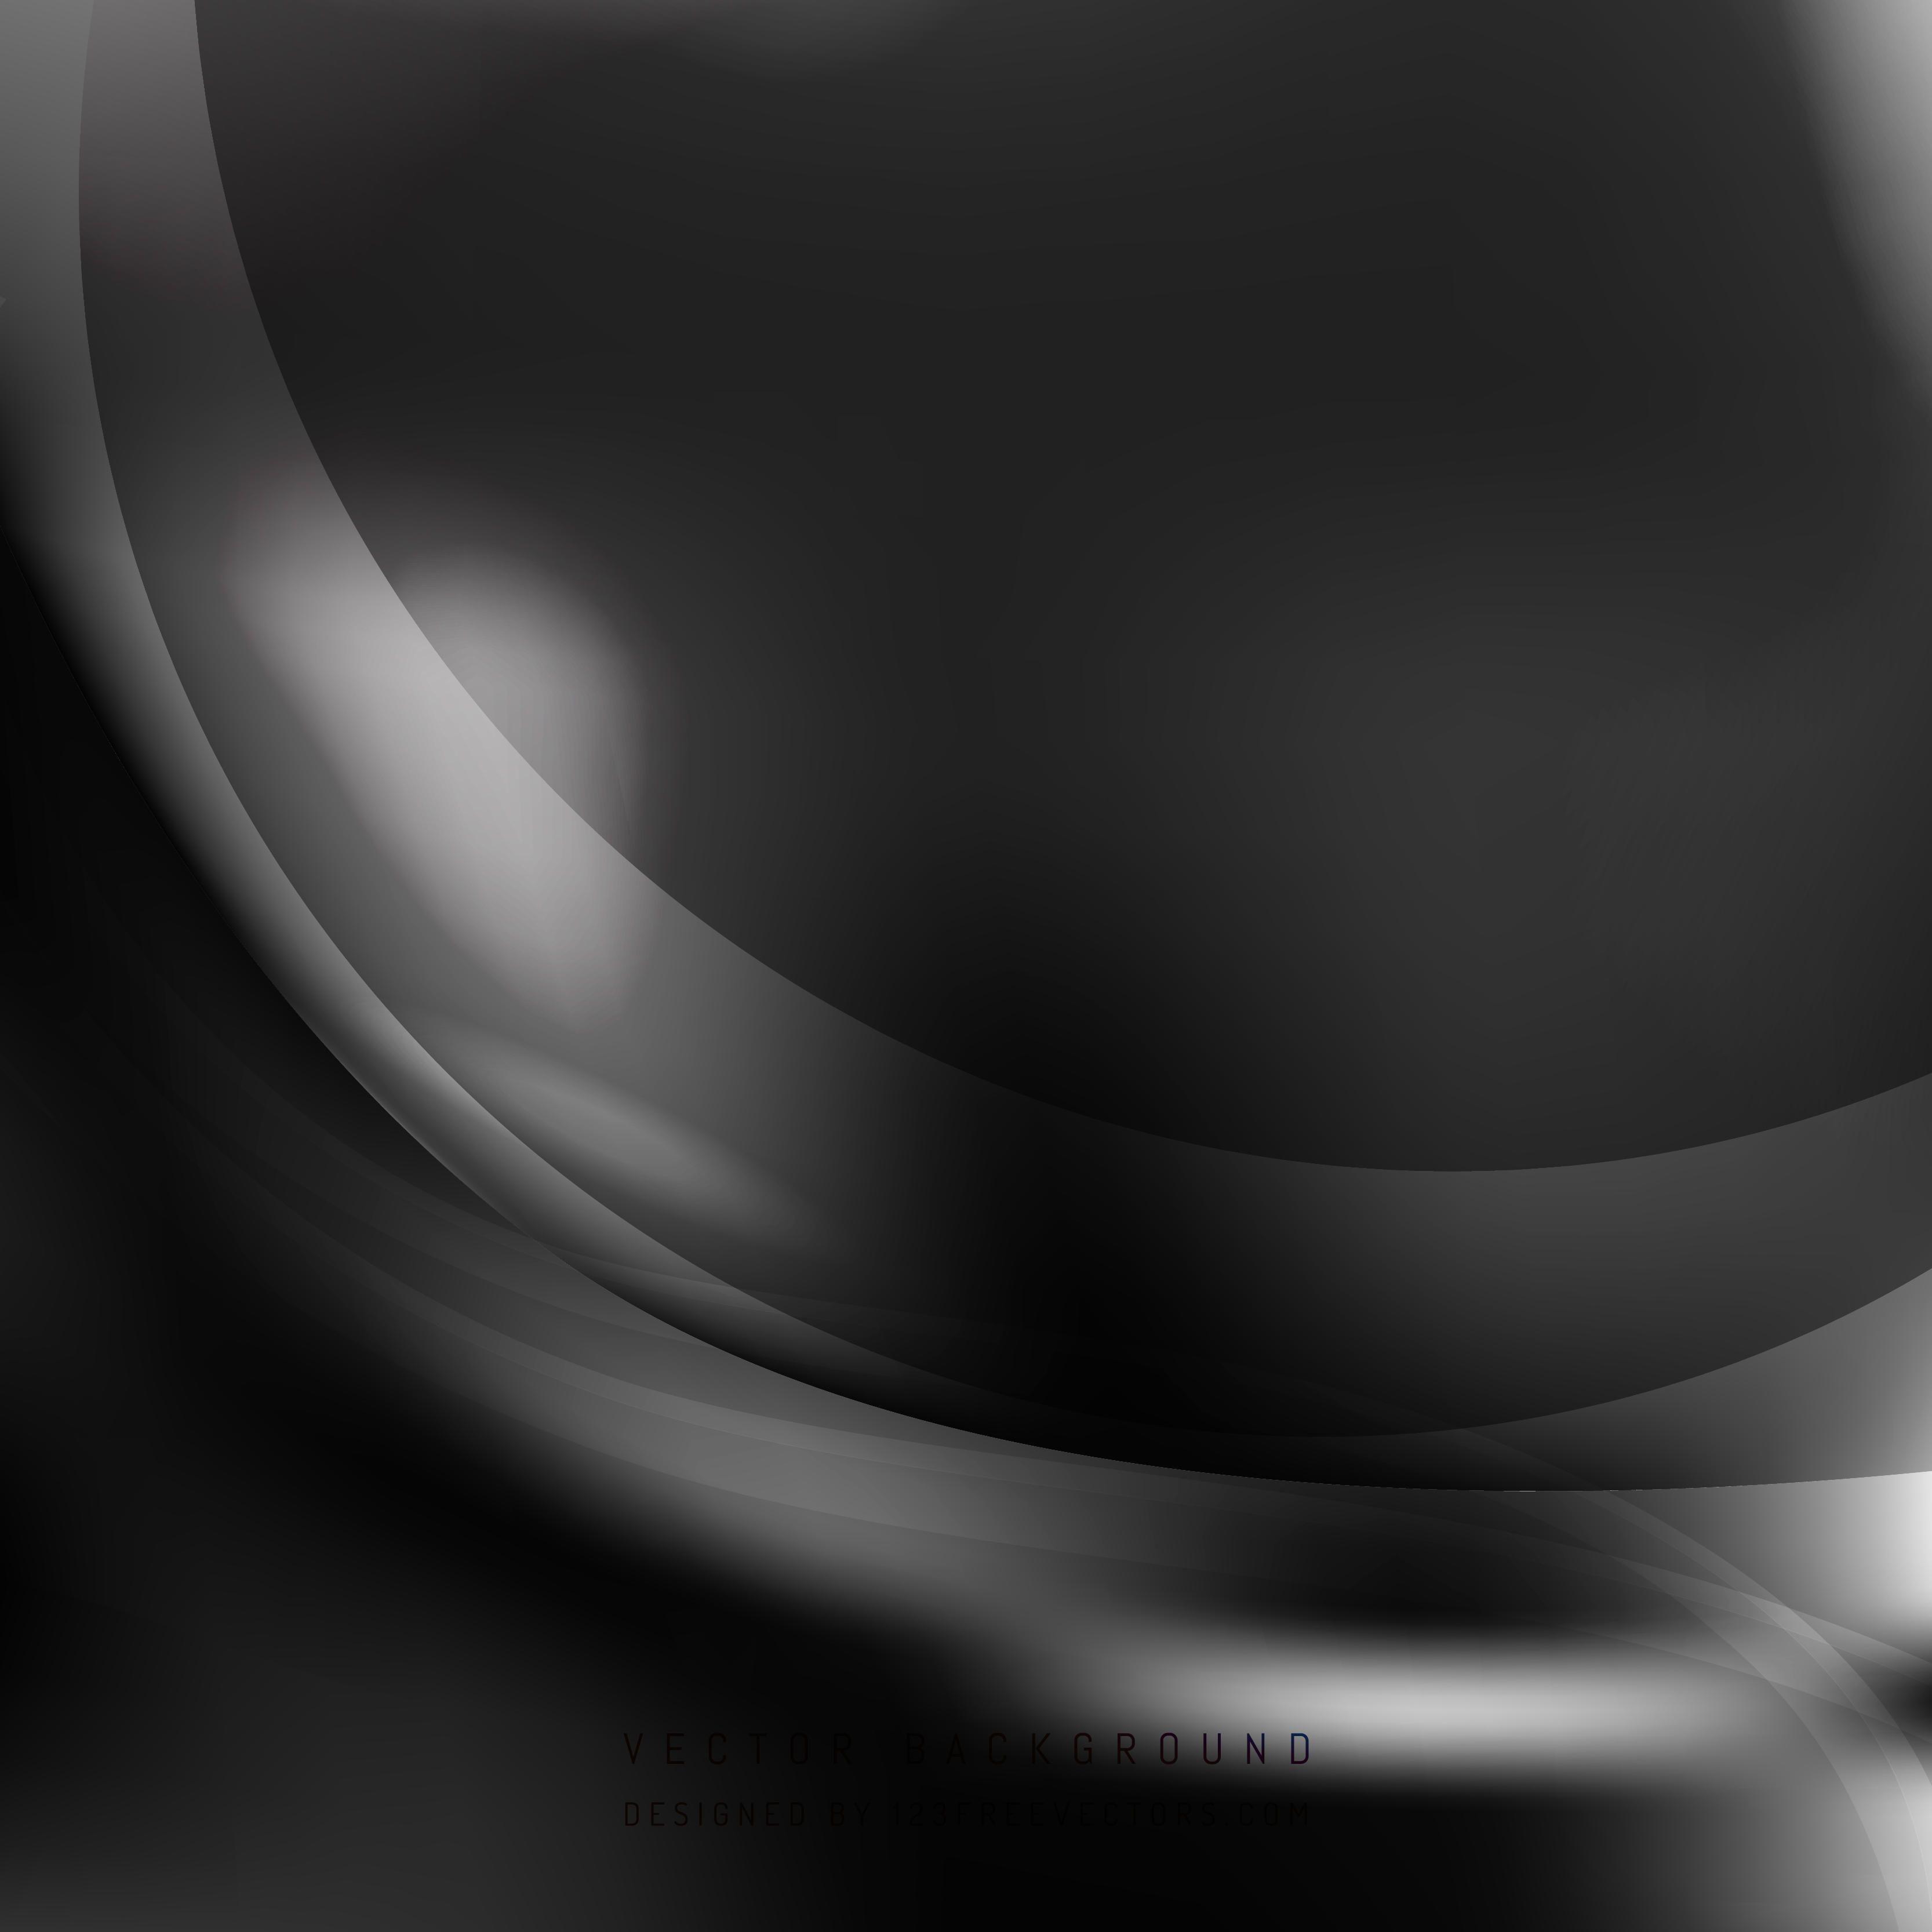 Black Abstract Backgrounds Designs - Wallpaper Cave